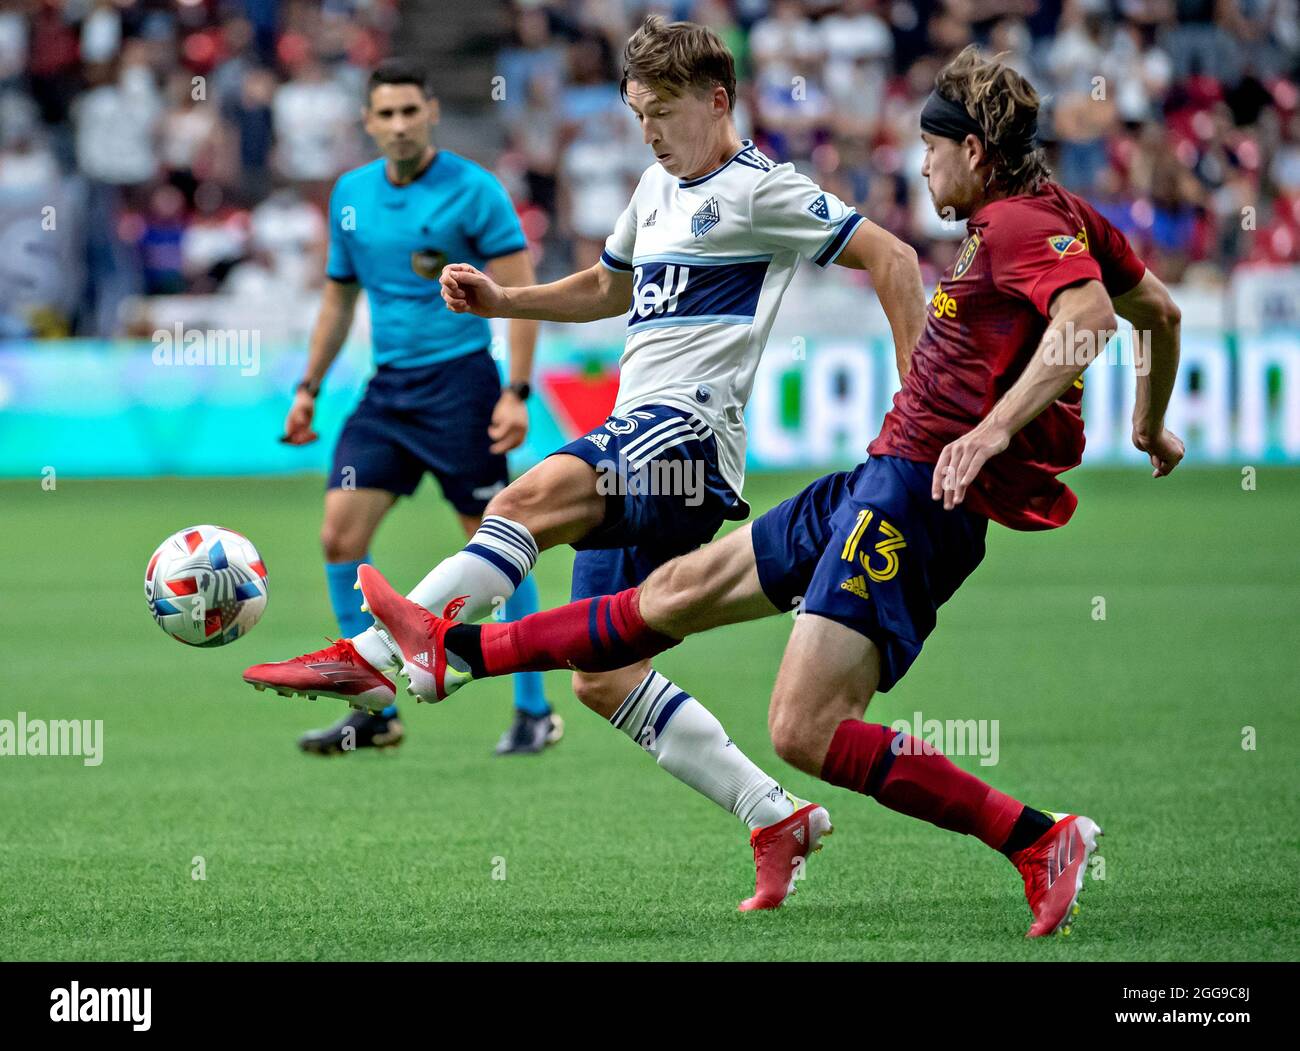 Vancouver, Canada. 29th Aug, 2021. Vancouver Whitecaps' Ryan Gauld (L) vies with Real Salt Lake's Nick Besler during the MLS soccer match between Vancouver Whitecaps and Real Salt Lake at BC Place in Vancouver, Canada, August 29, 2021. Credit: Andrew Soong/Xinhua/Alamy Live News Stock Photo